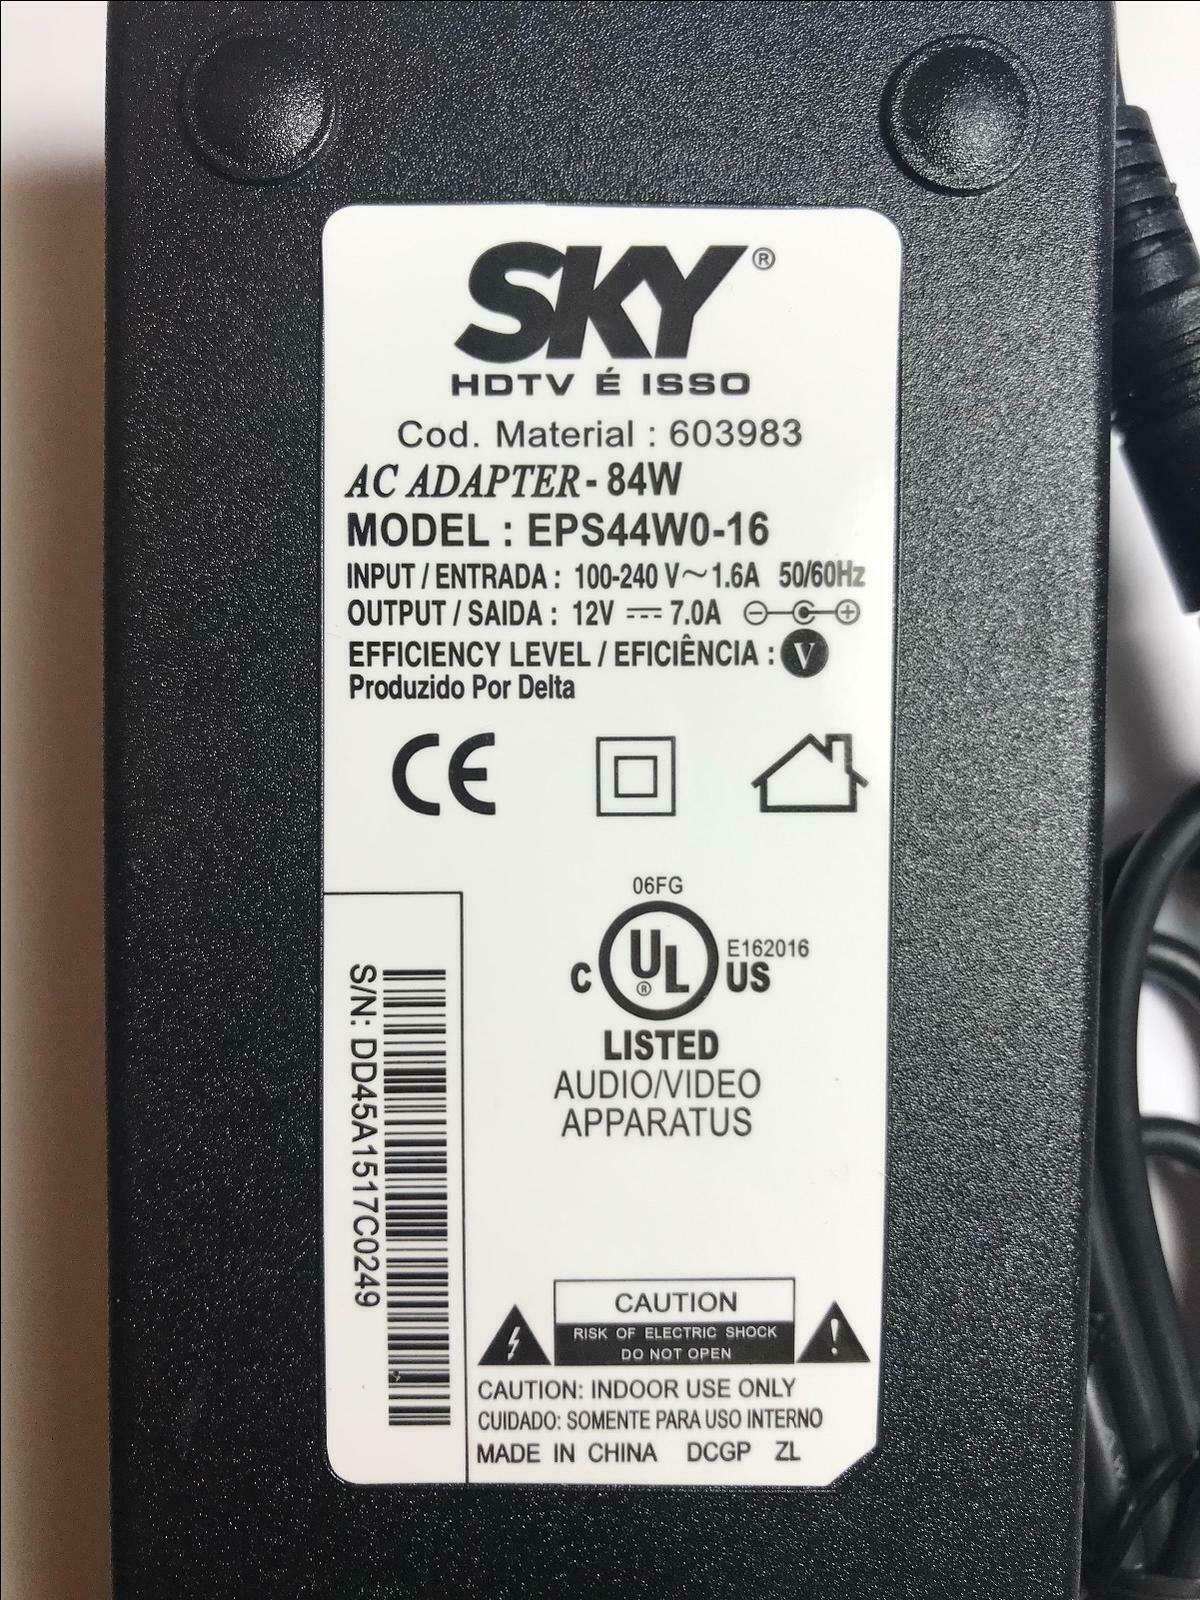 Replacement for 12V 6.67A FRANMAR AC Adapter model F10903-C 4 Pin AC-DC ADAPTOR Type: Power Adapter Max. Output Power